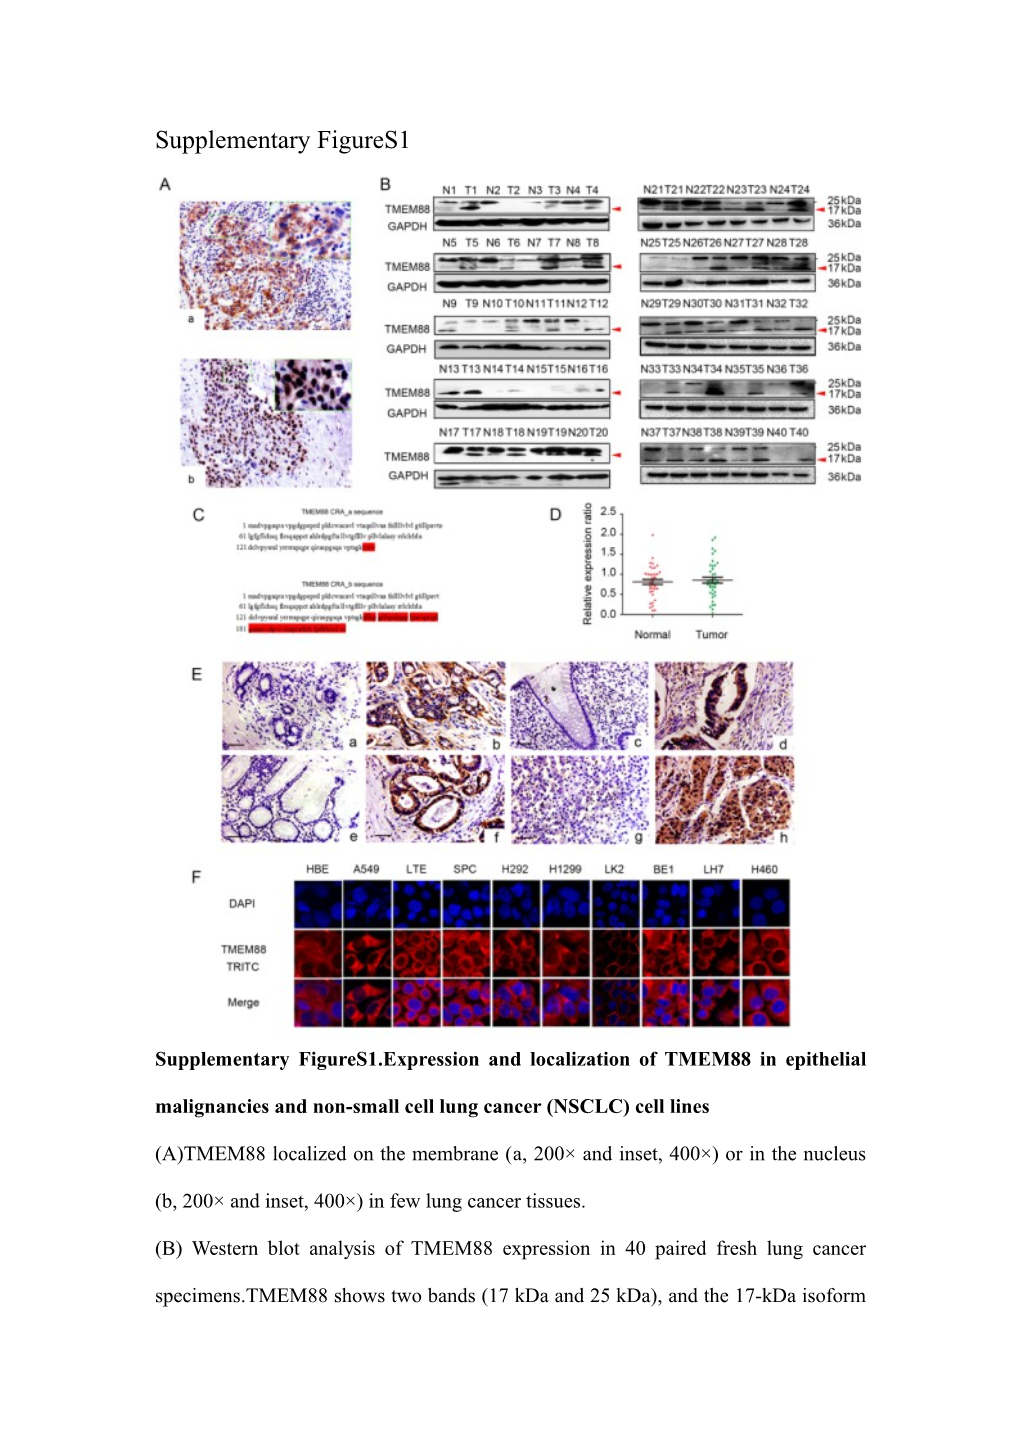 Supplementary Figures1.Expression and Localization of TMEM88 in Epithelial Malignancies